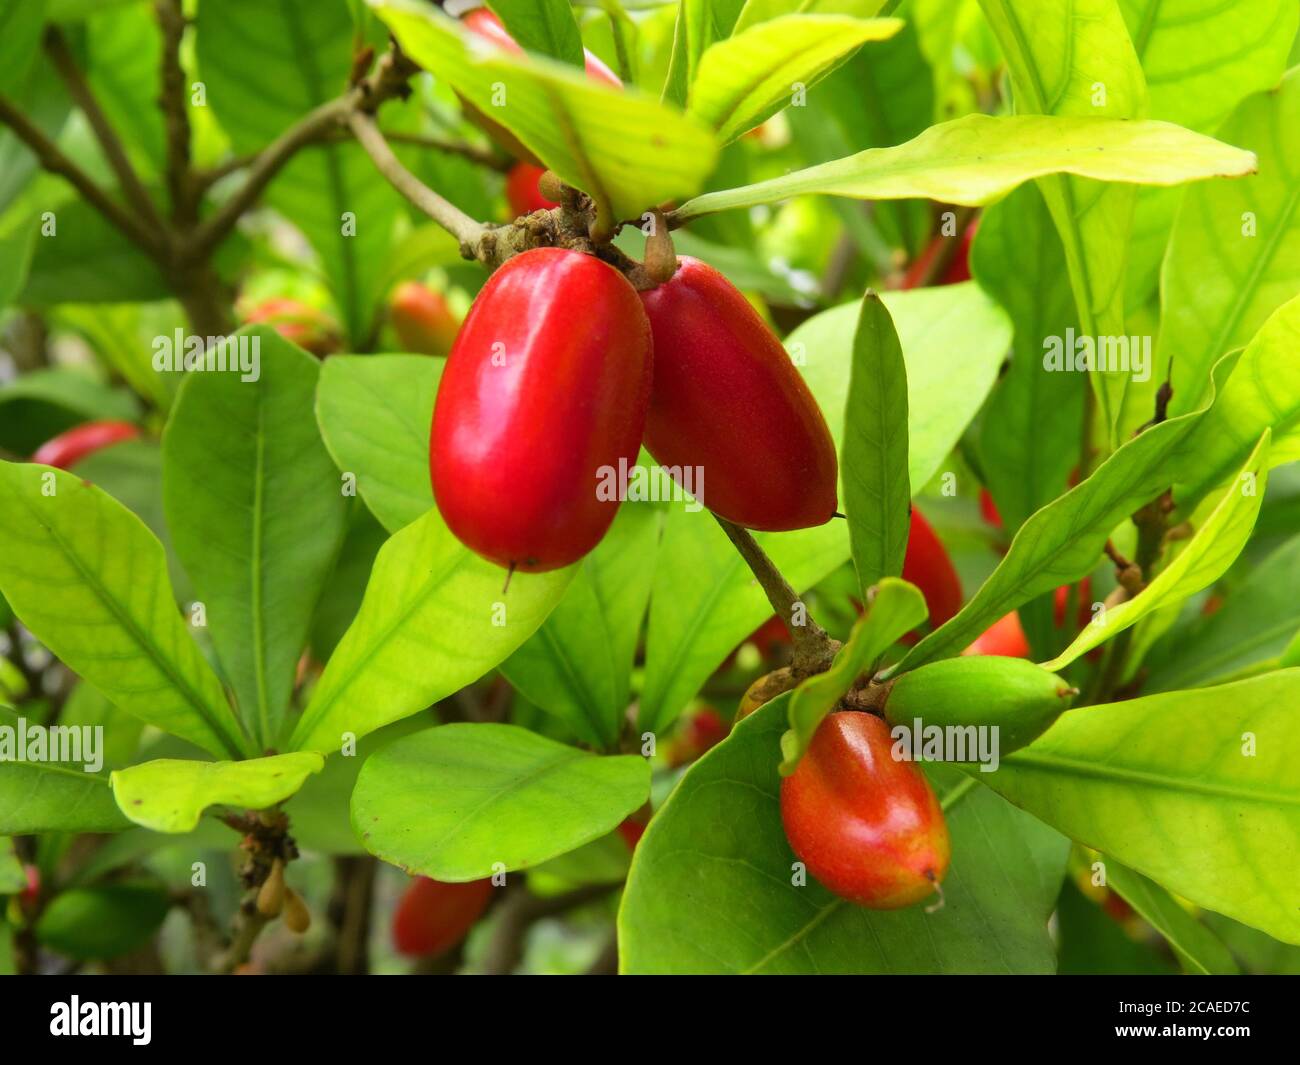 Closeup shot of red Miracle fruit on a branch in a garden on a sunny afternoon Stock Photo